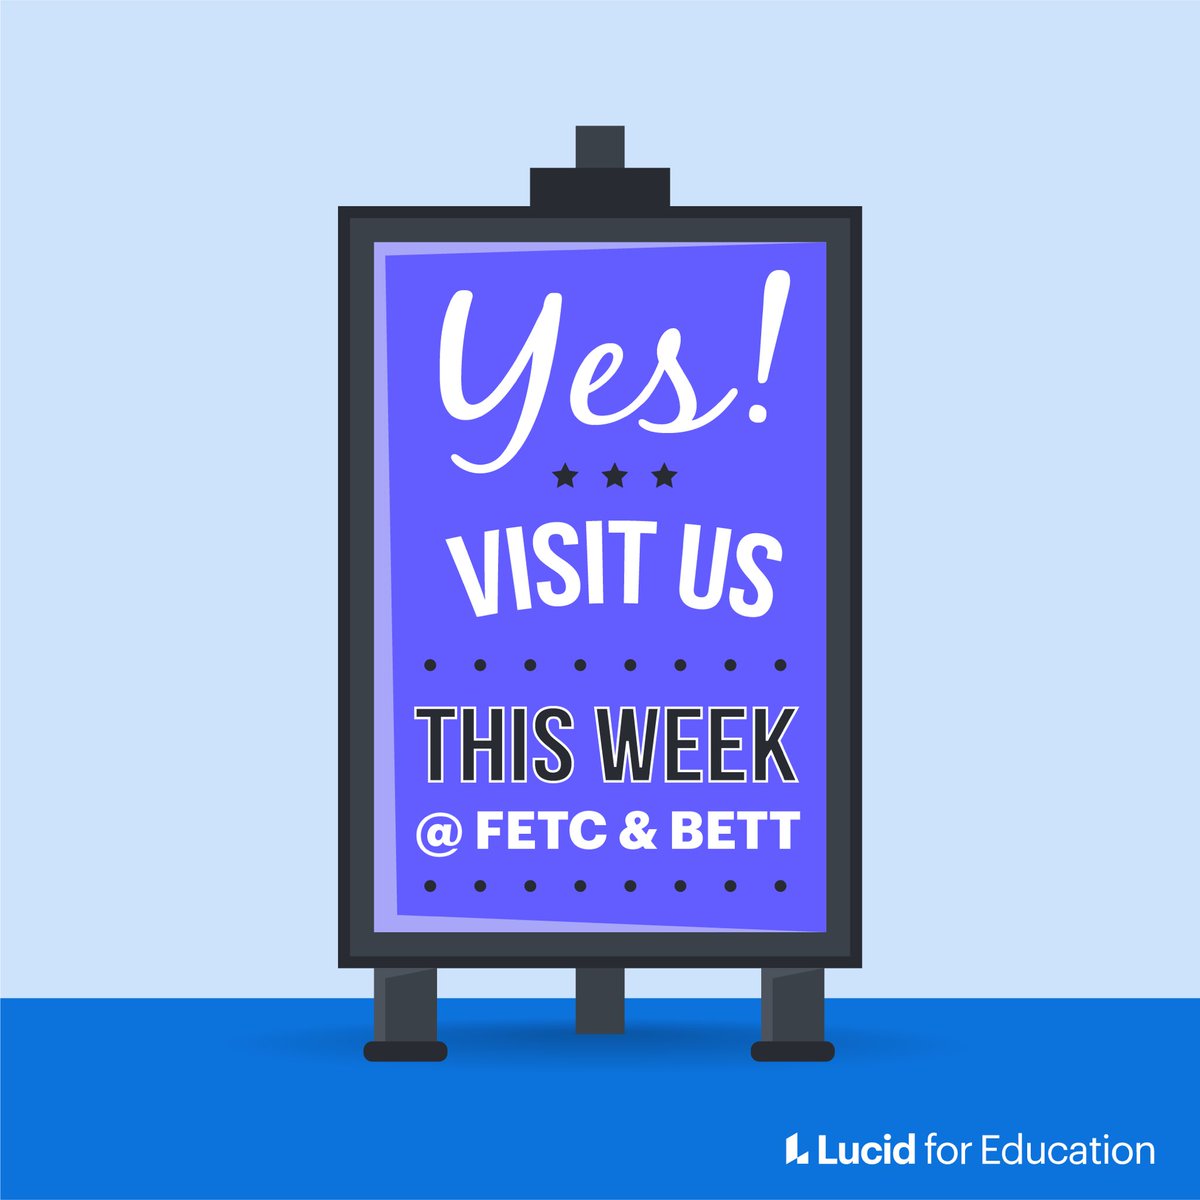 What's your game plan for the week? We're super excited to connect with you at #FETC (Booth 2014) and #BETT (Google Booth). Come say hi and let's avoid the awkward standing! 🚀